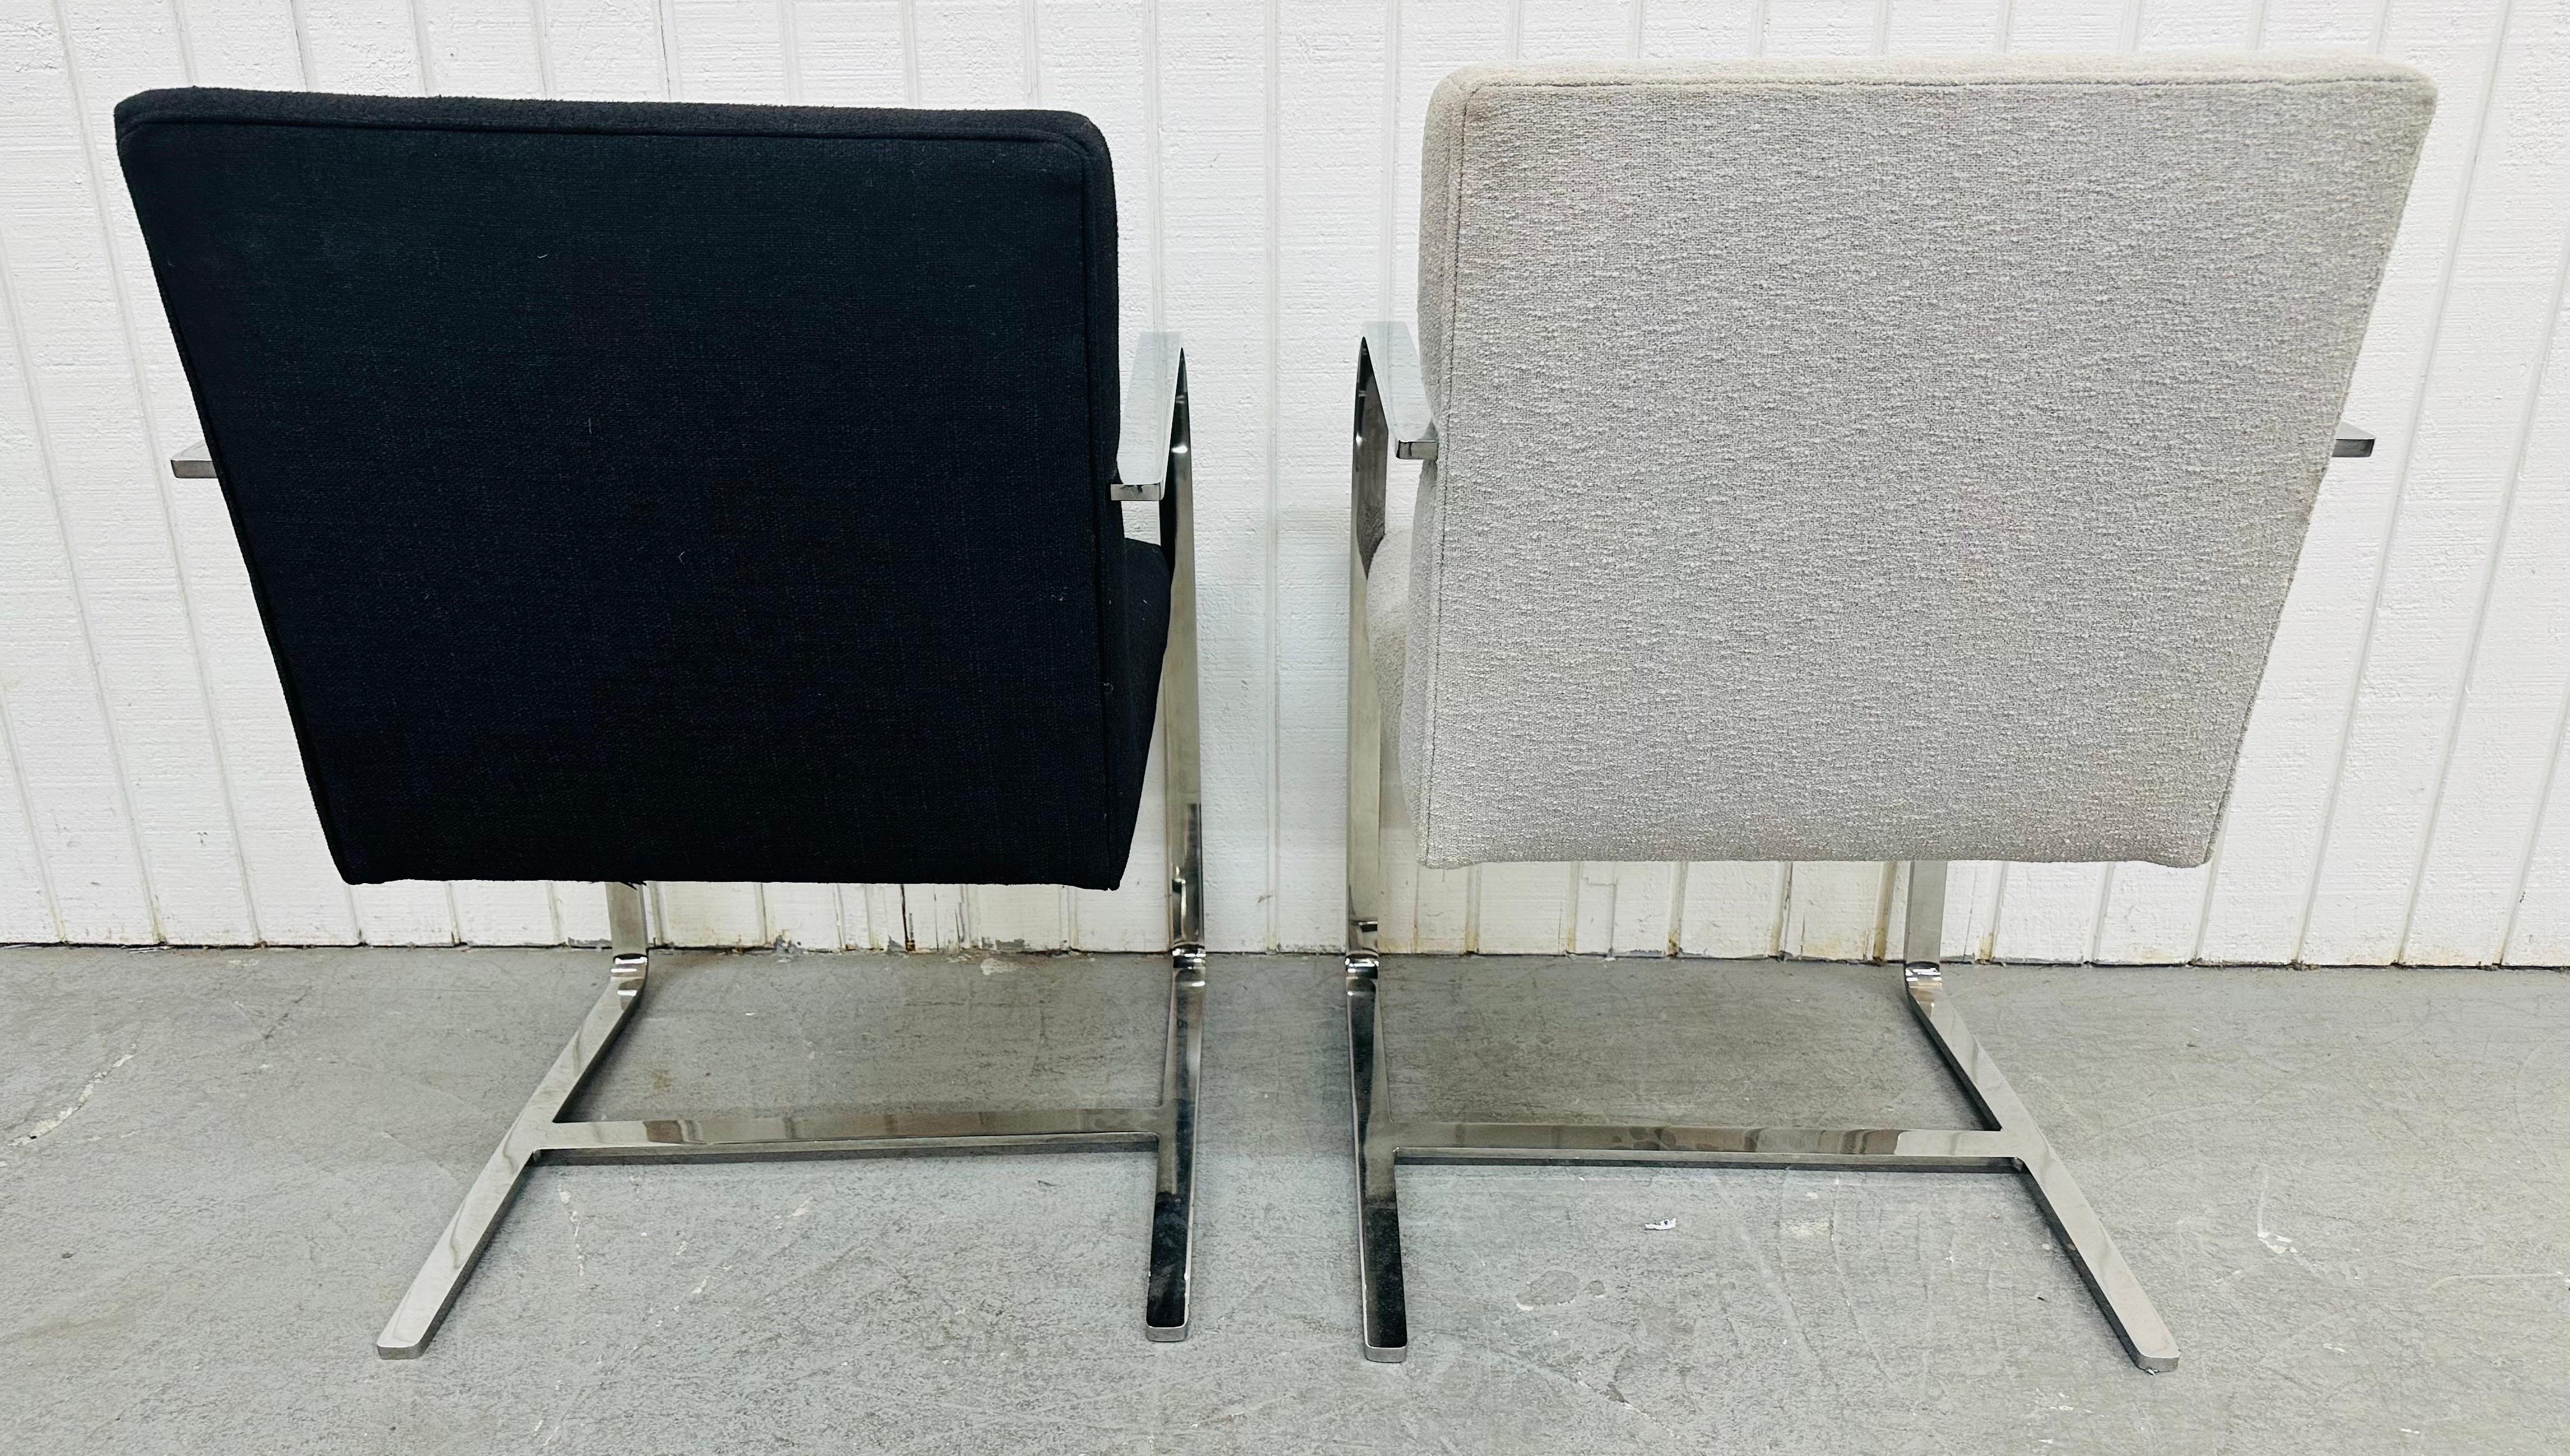 Vintage Modern Bruno Chrome Arm Chairs - Set of 2 In Good Condition For Sale In Clarksboro, NJ